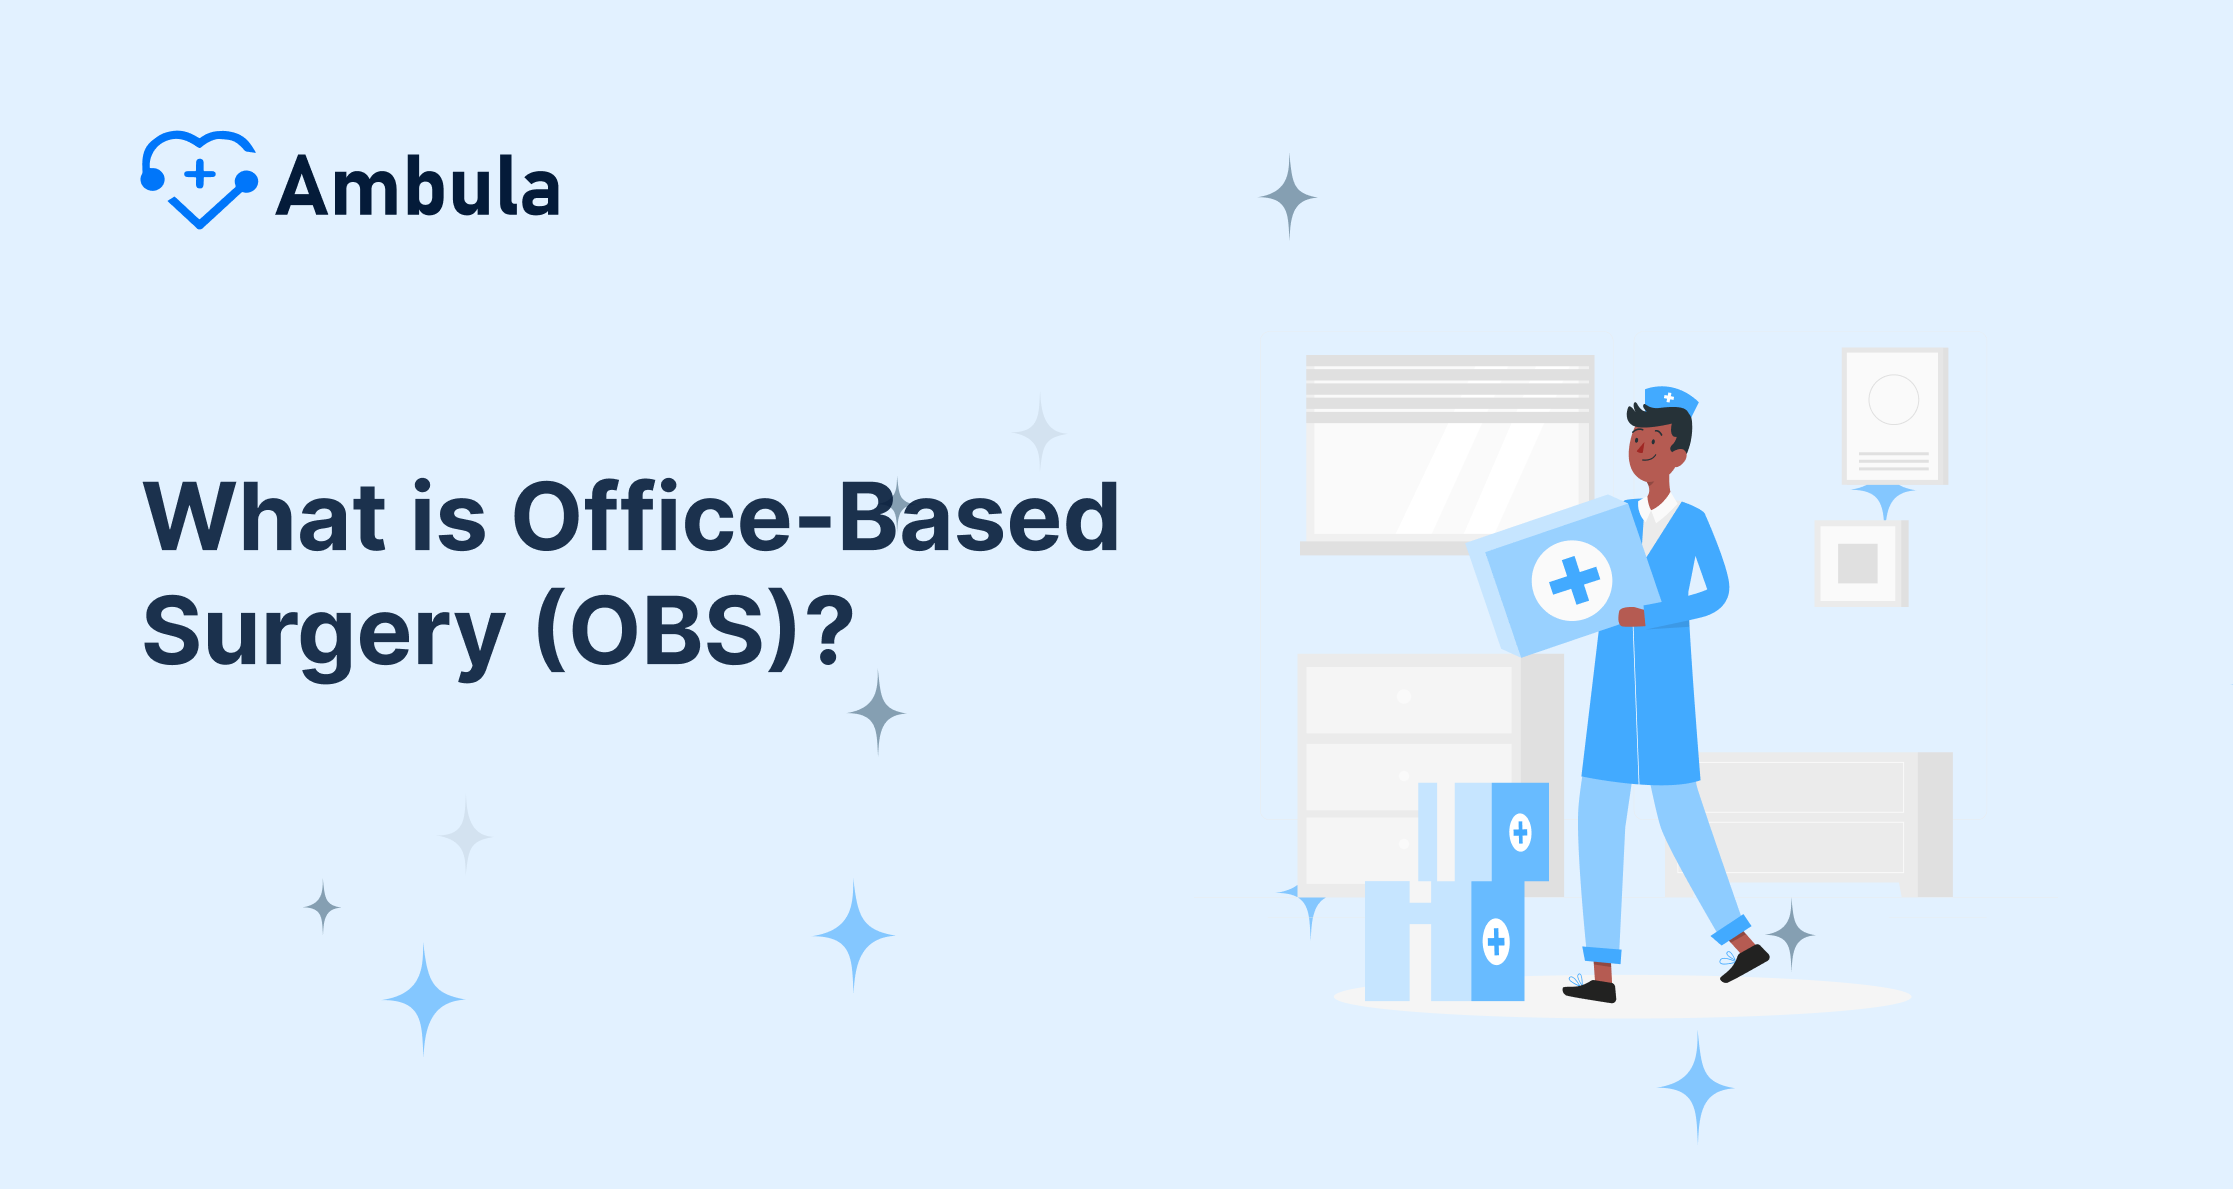 What is Office-Based Surgery (OBS)?